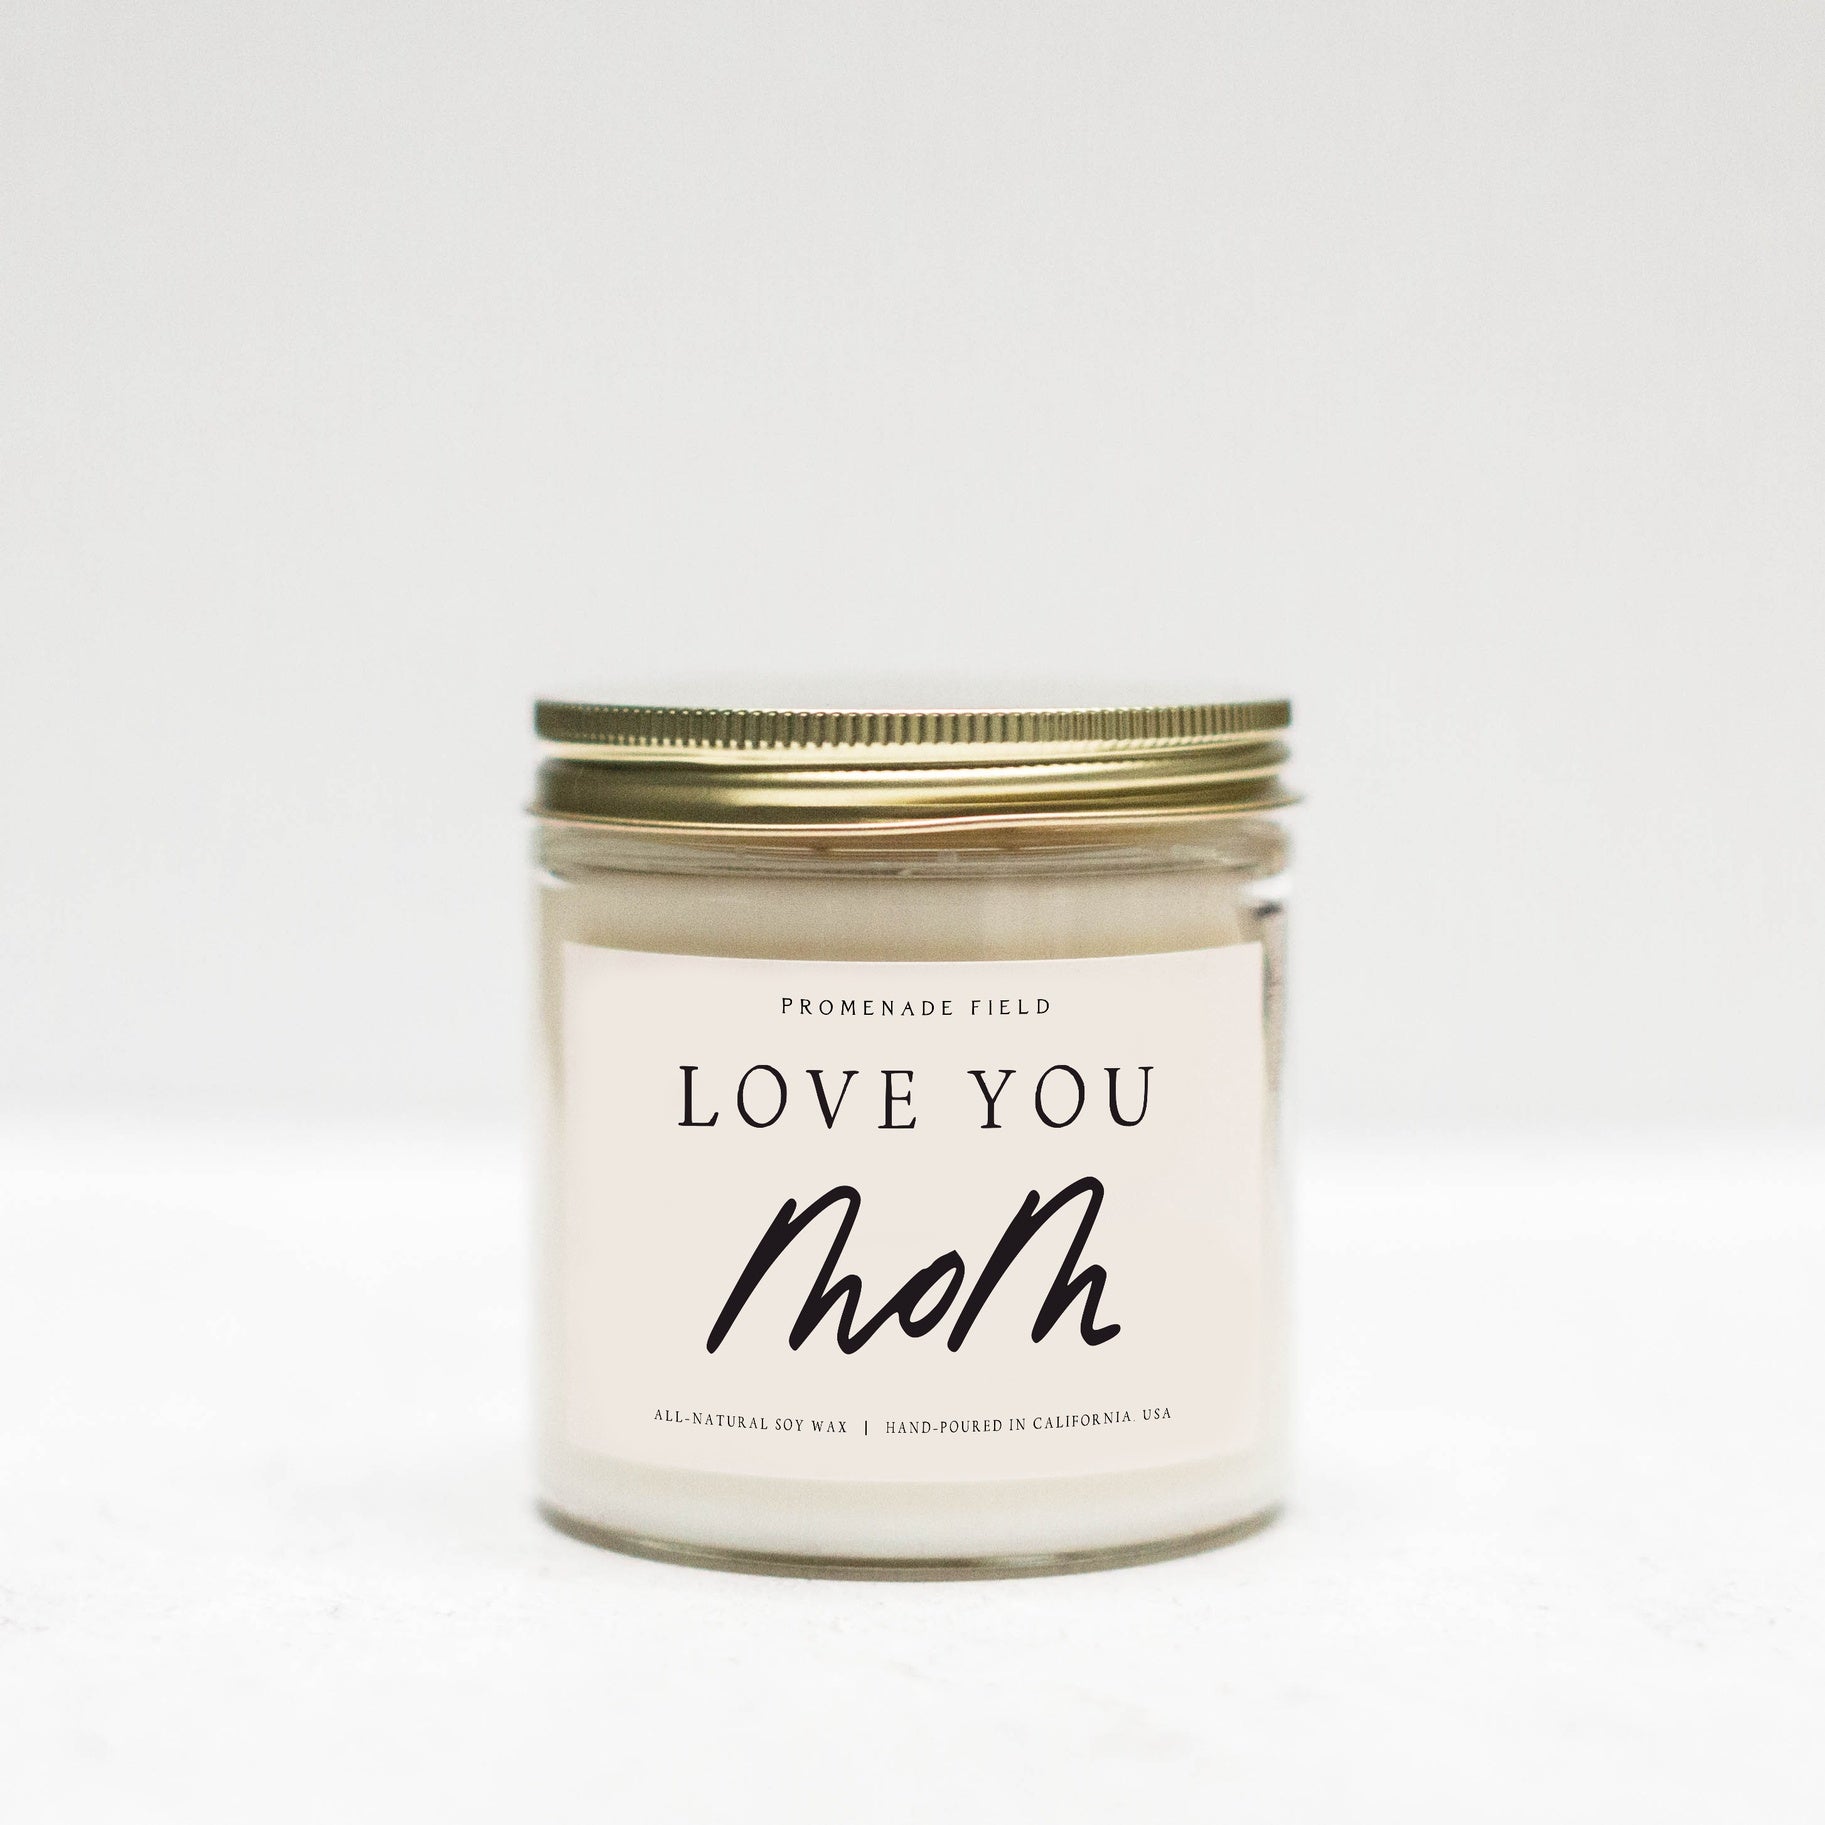 The Love You Mom Soy Candle